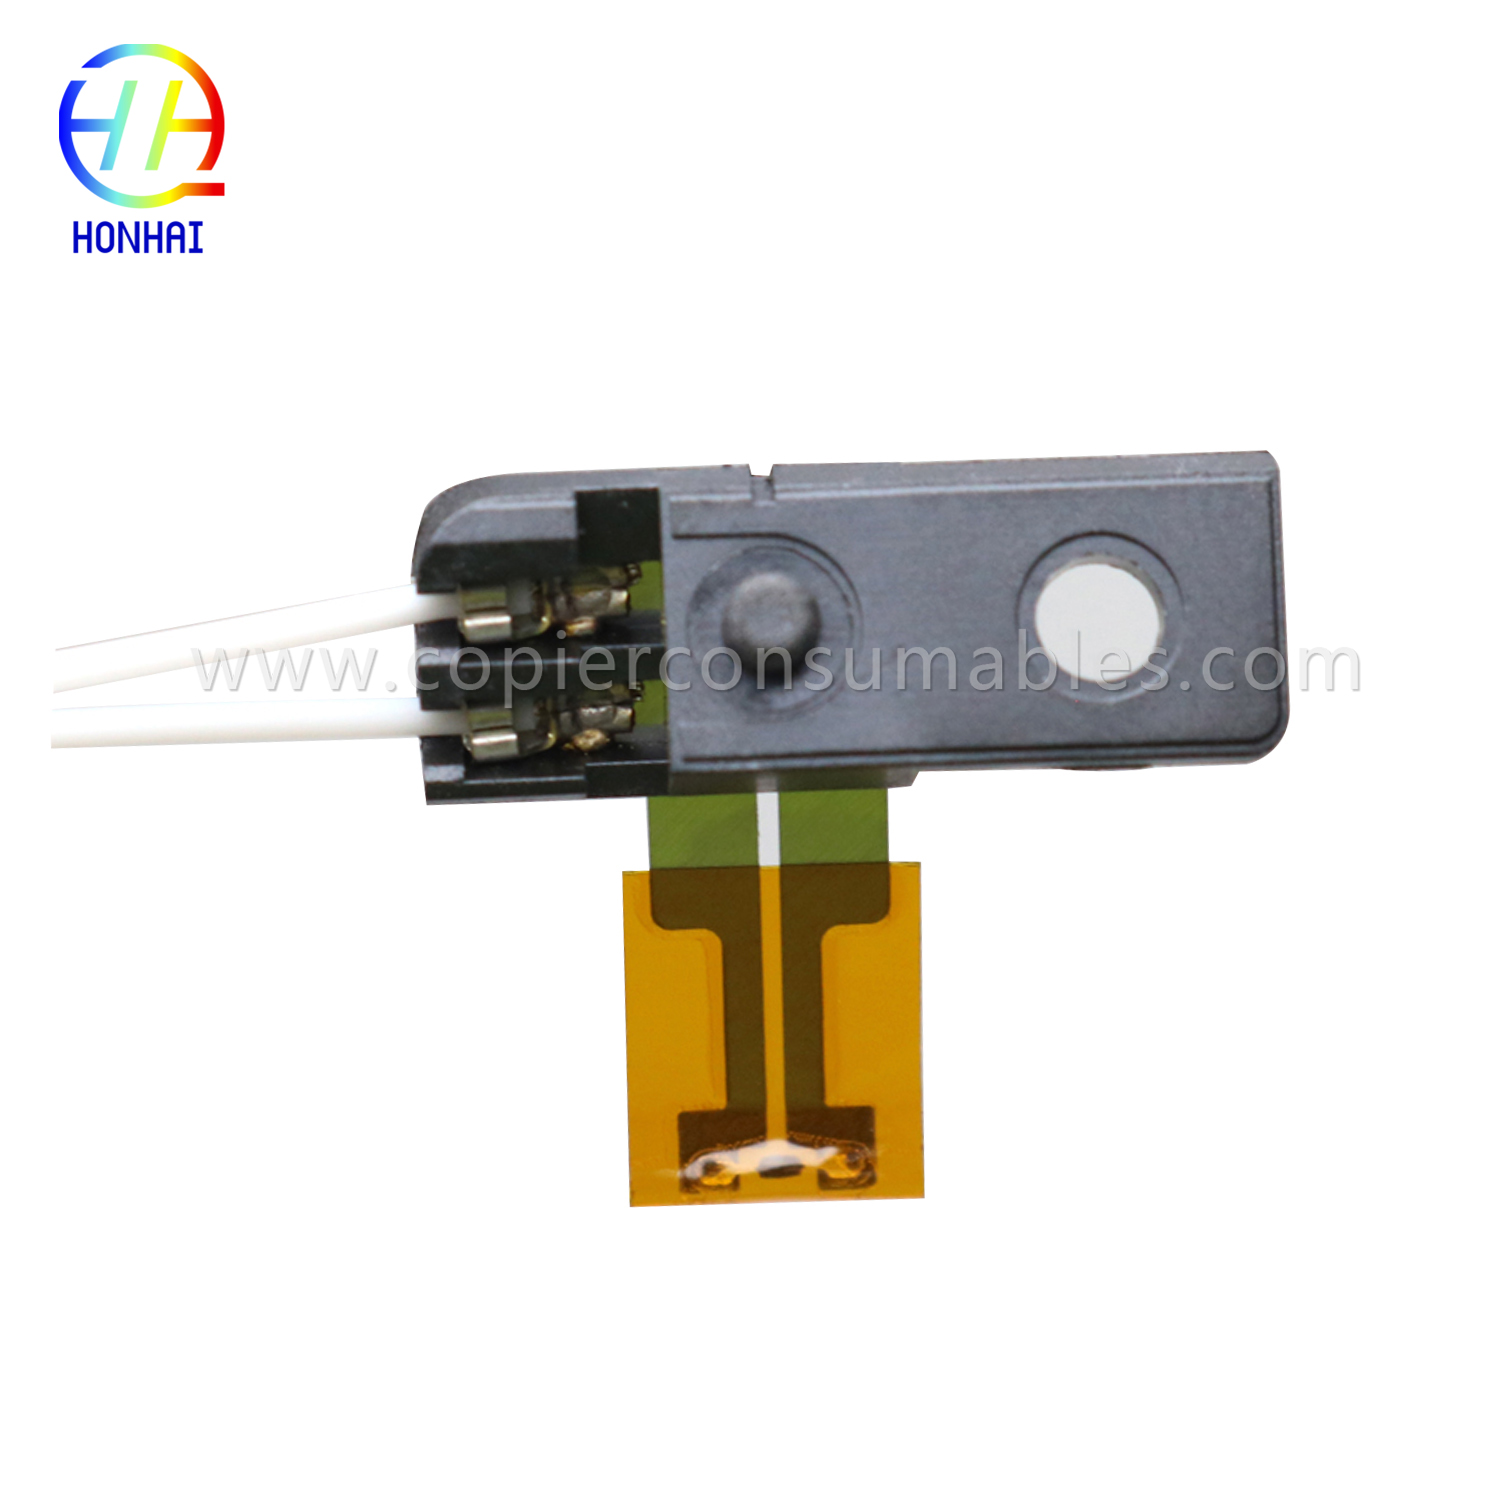 Fuser Unit Thermistor for Xerox P4 3370 3375 3373 7830 7835 7845 7855 7525 7535 7545 7556 4470 4475 5570 5575 Original Disassembly3 Accessories